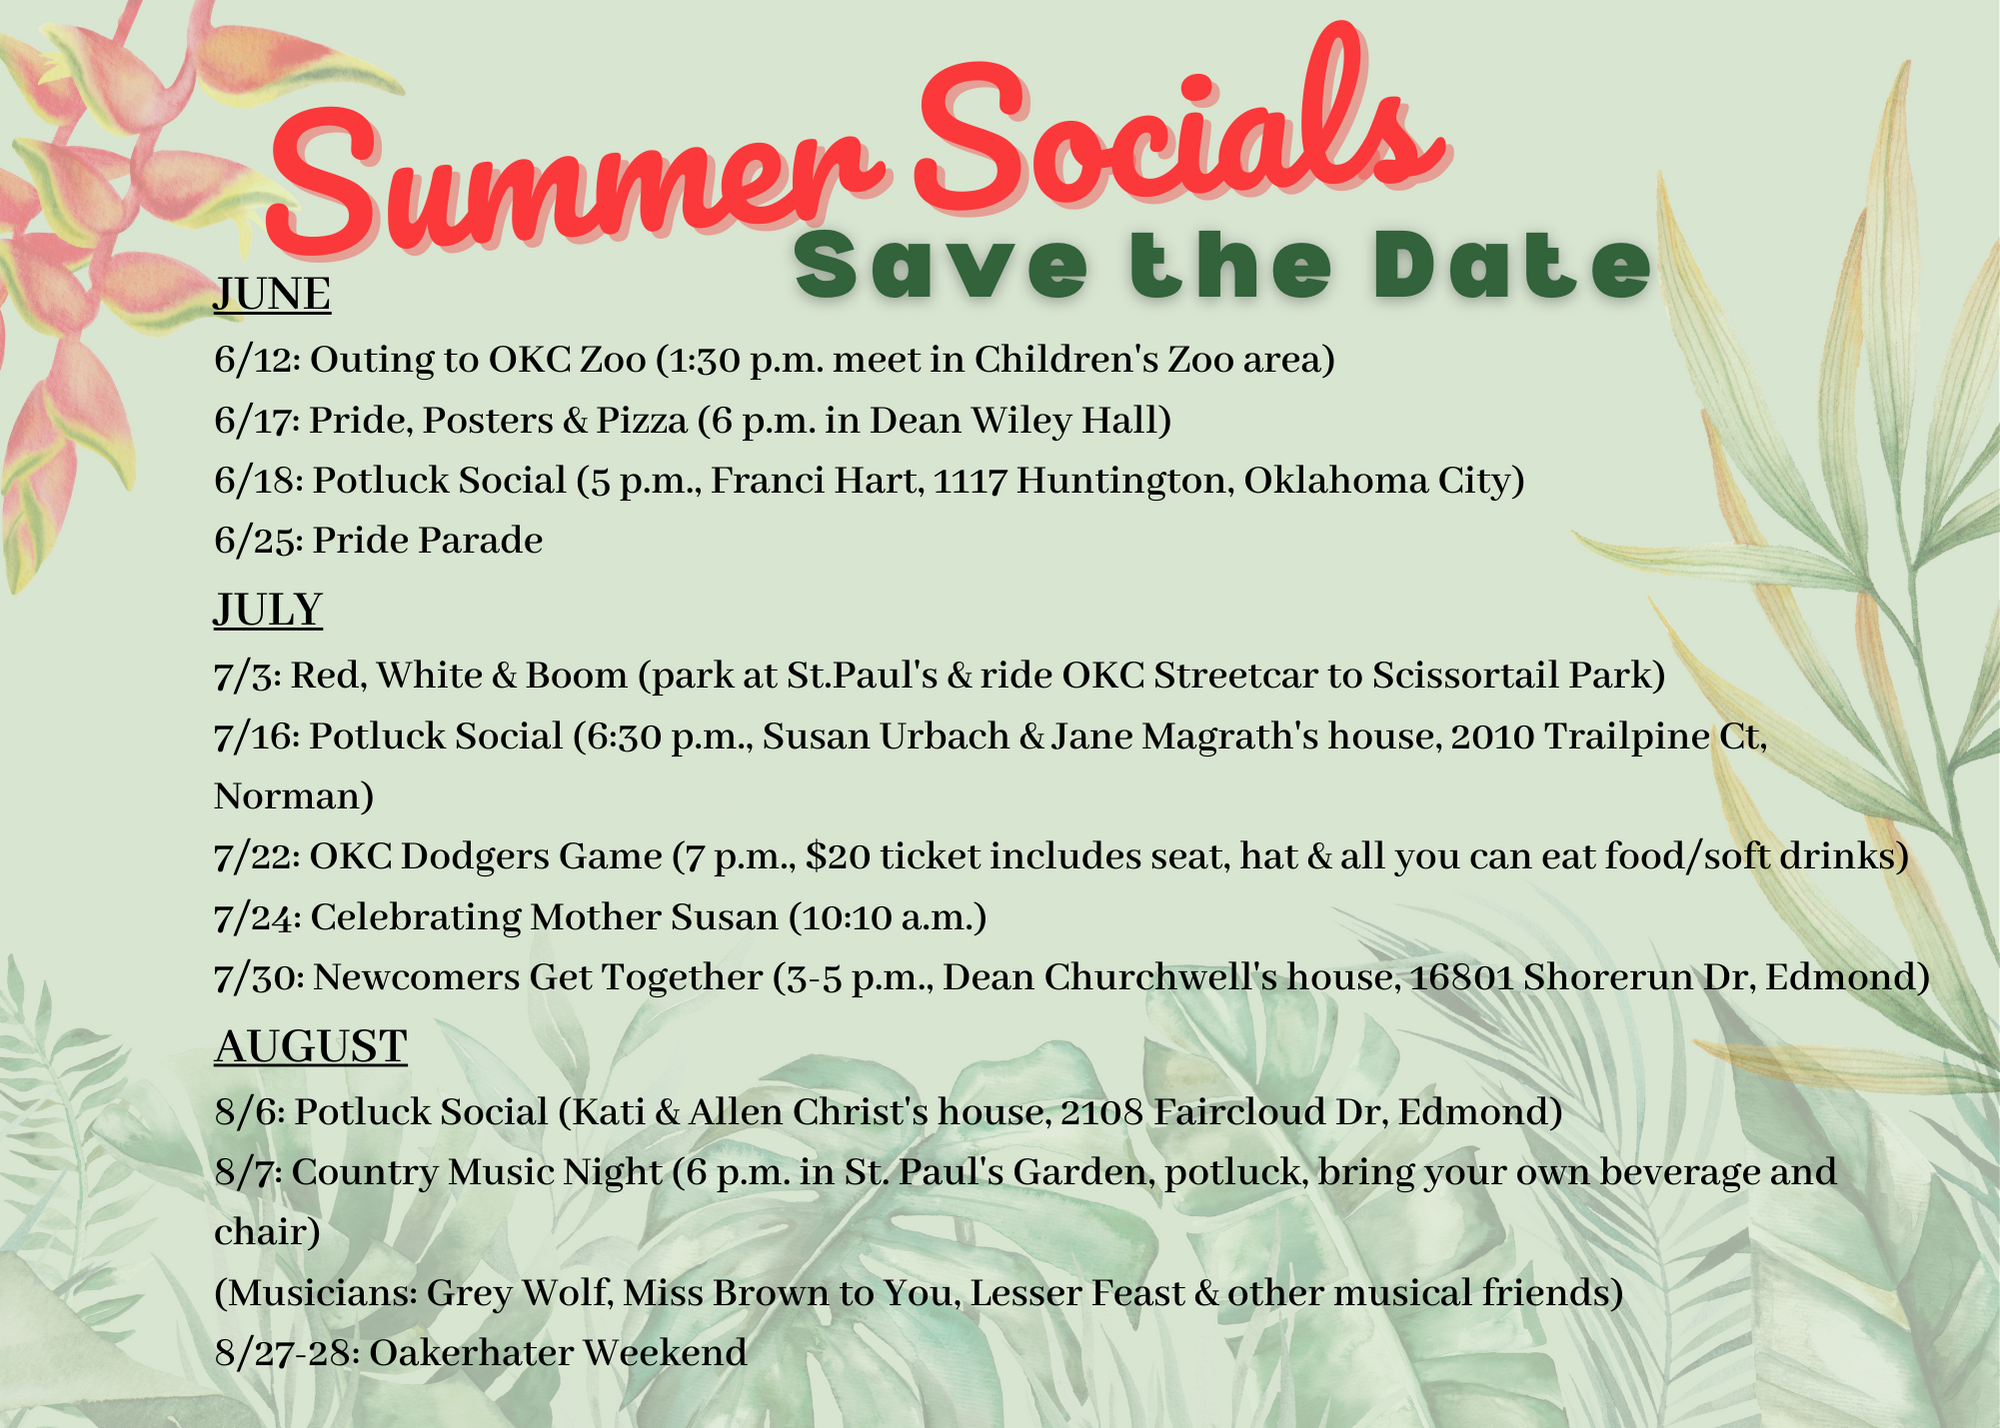 summer-socials-save-the-date-3_534